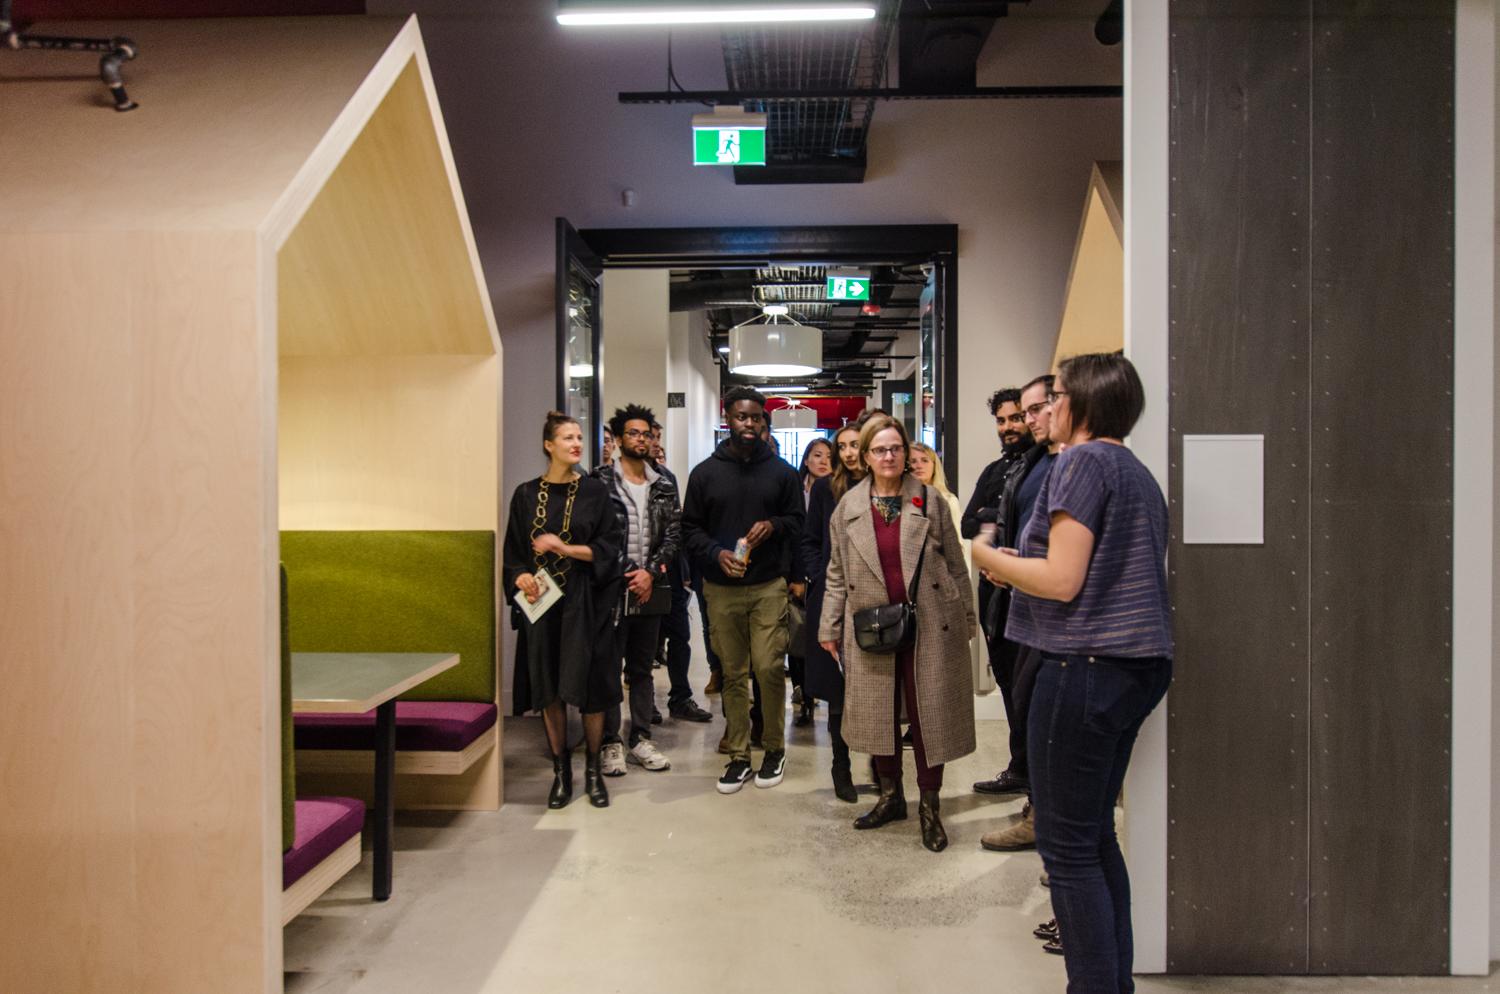 Tor McGlade leading an interior design tour at Artscape Daniels Launchpad, showing the group a covered wooden seating nook with olive and plum cushions